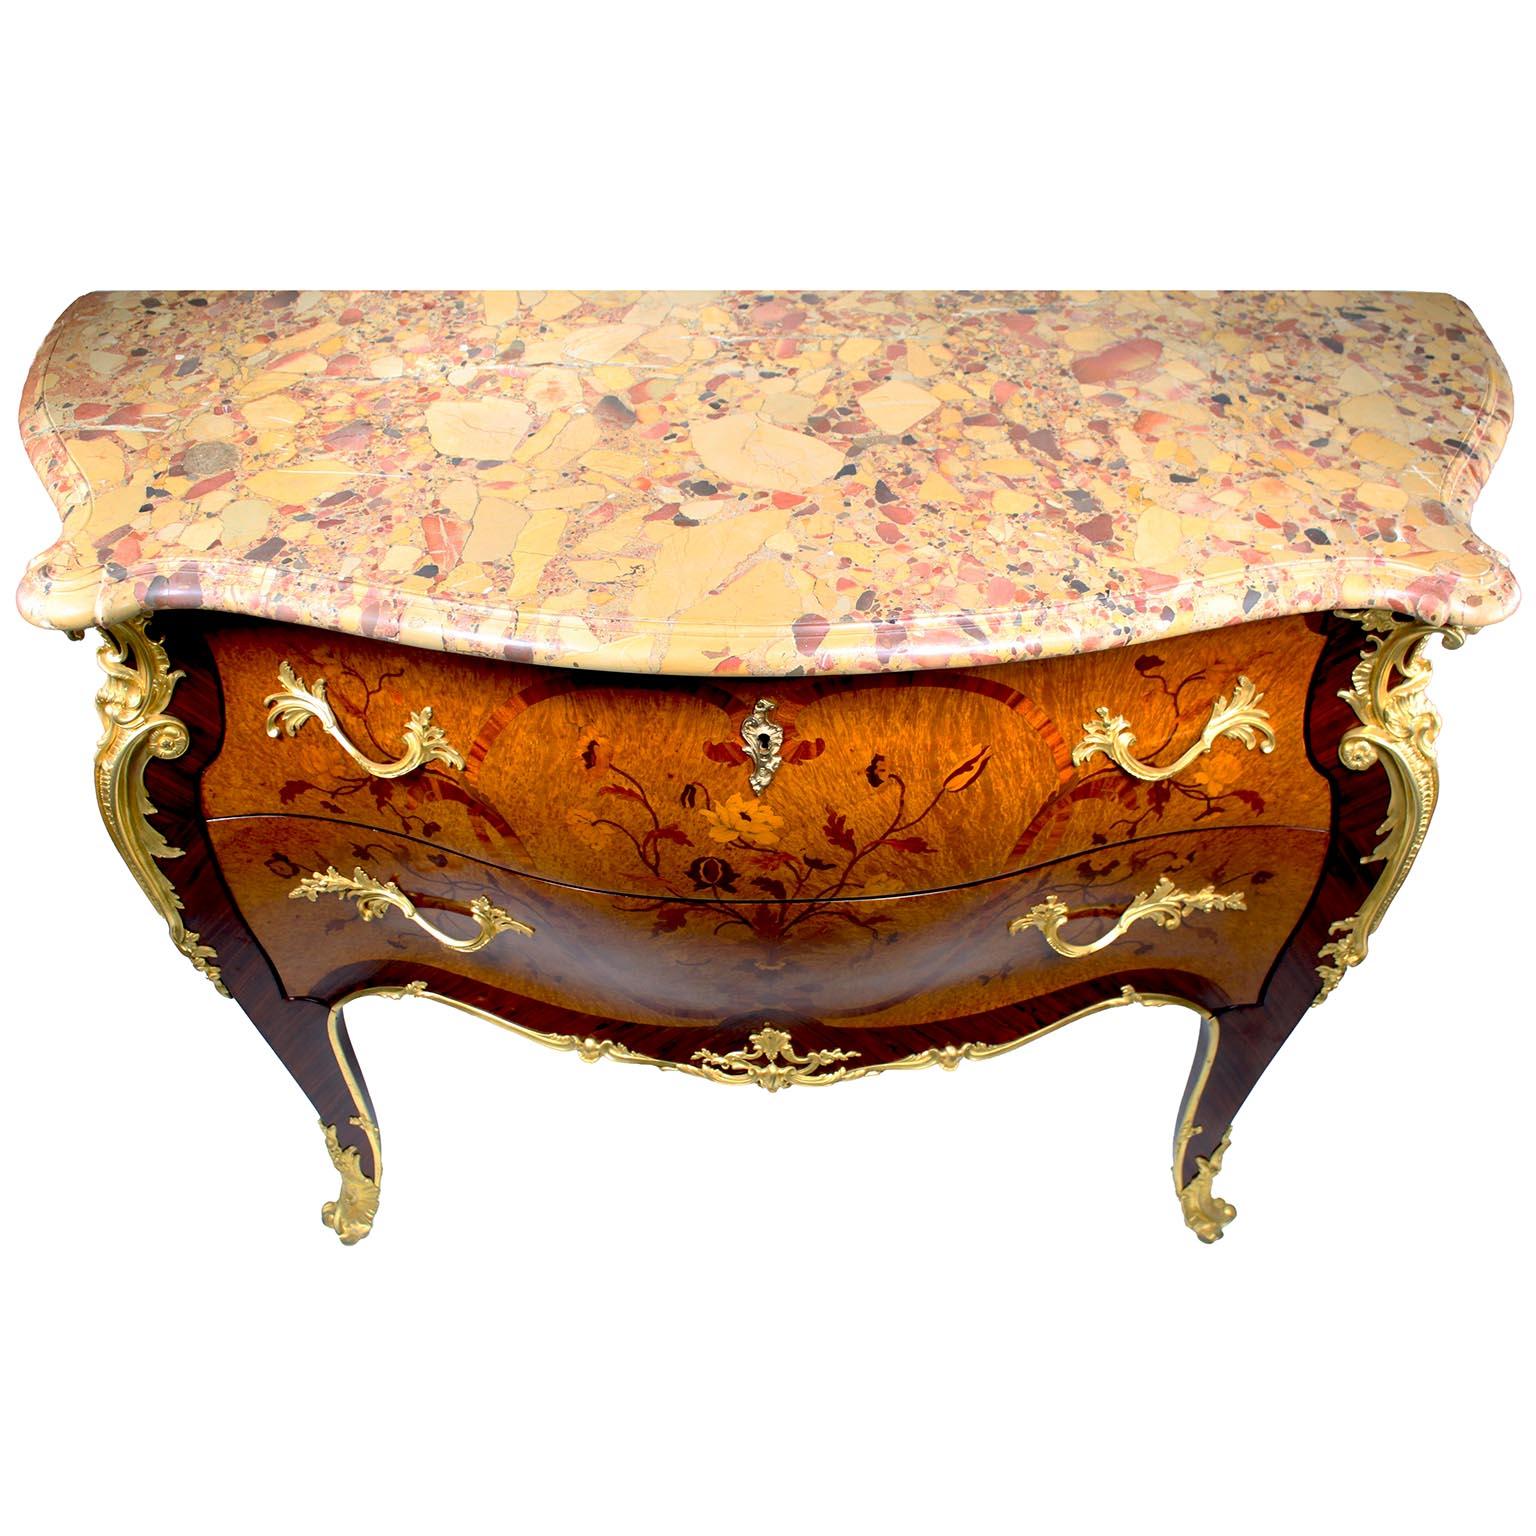 Gilt Fine French Louis XV Style Ormolu-Mounted Bombe Commode Attr. to François Linke For Sale